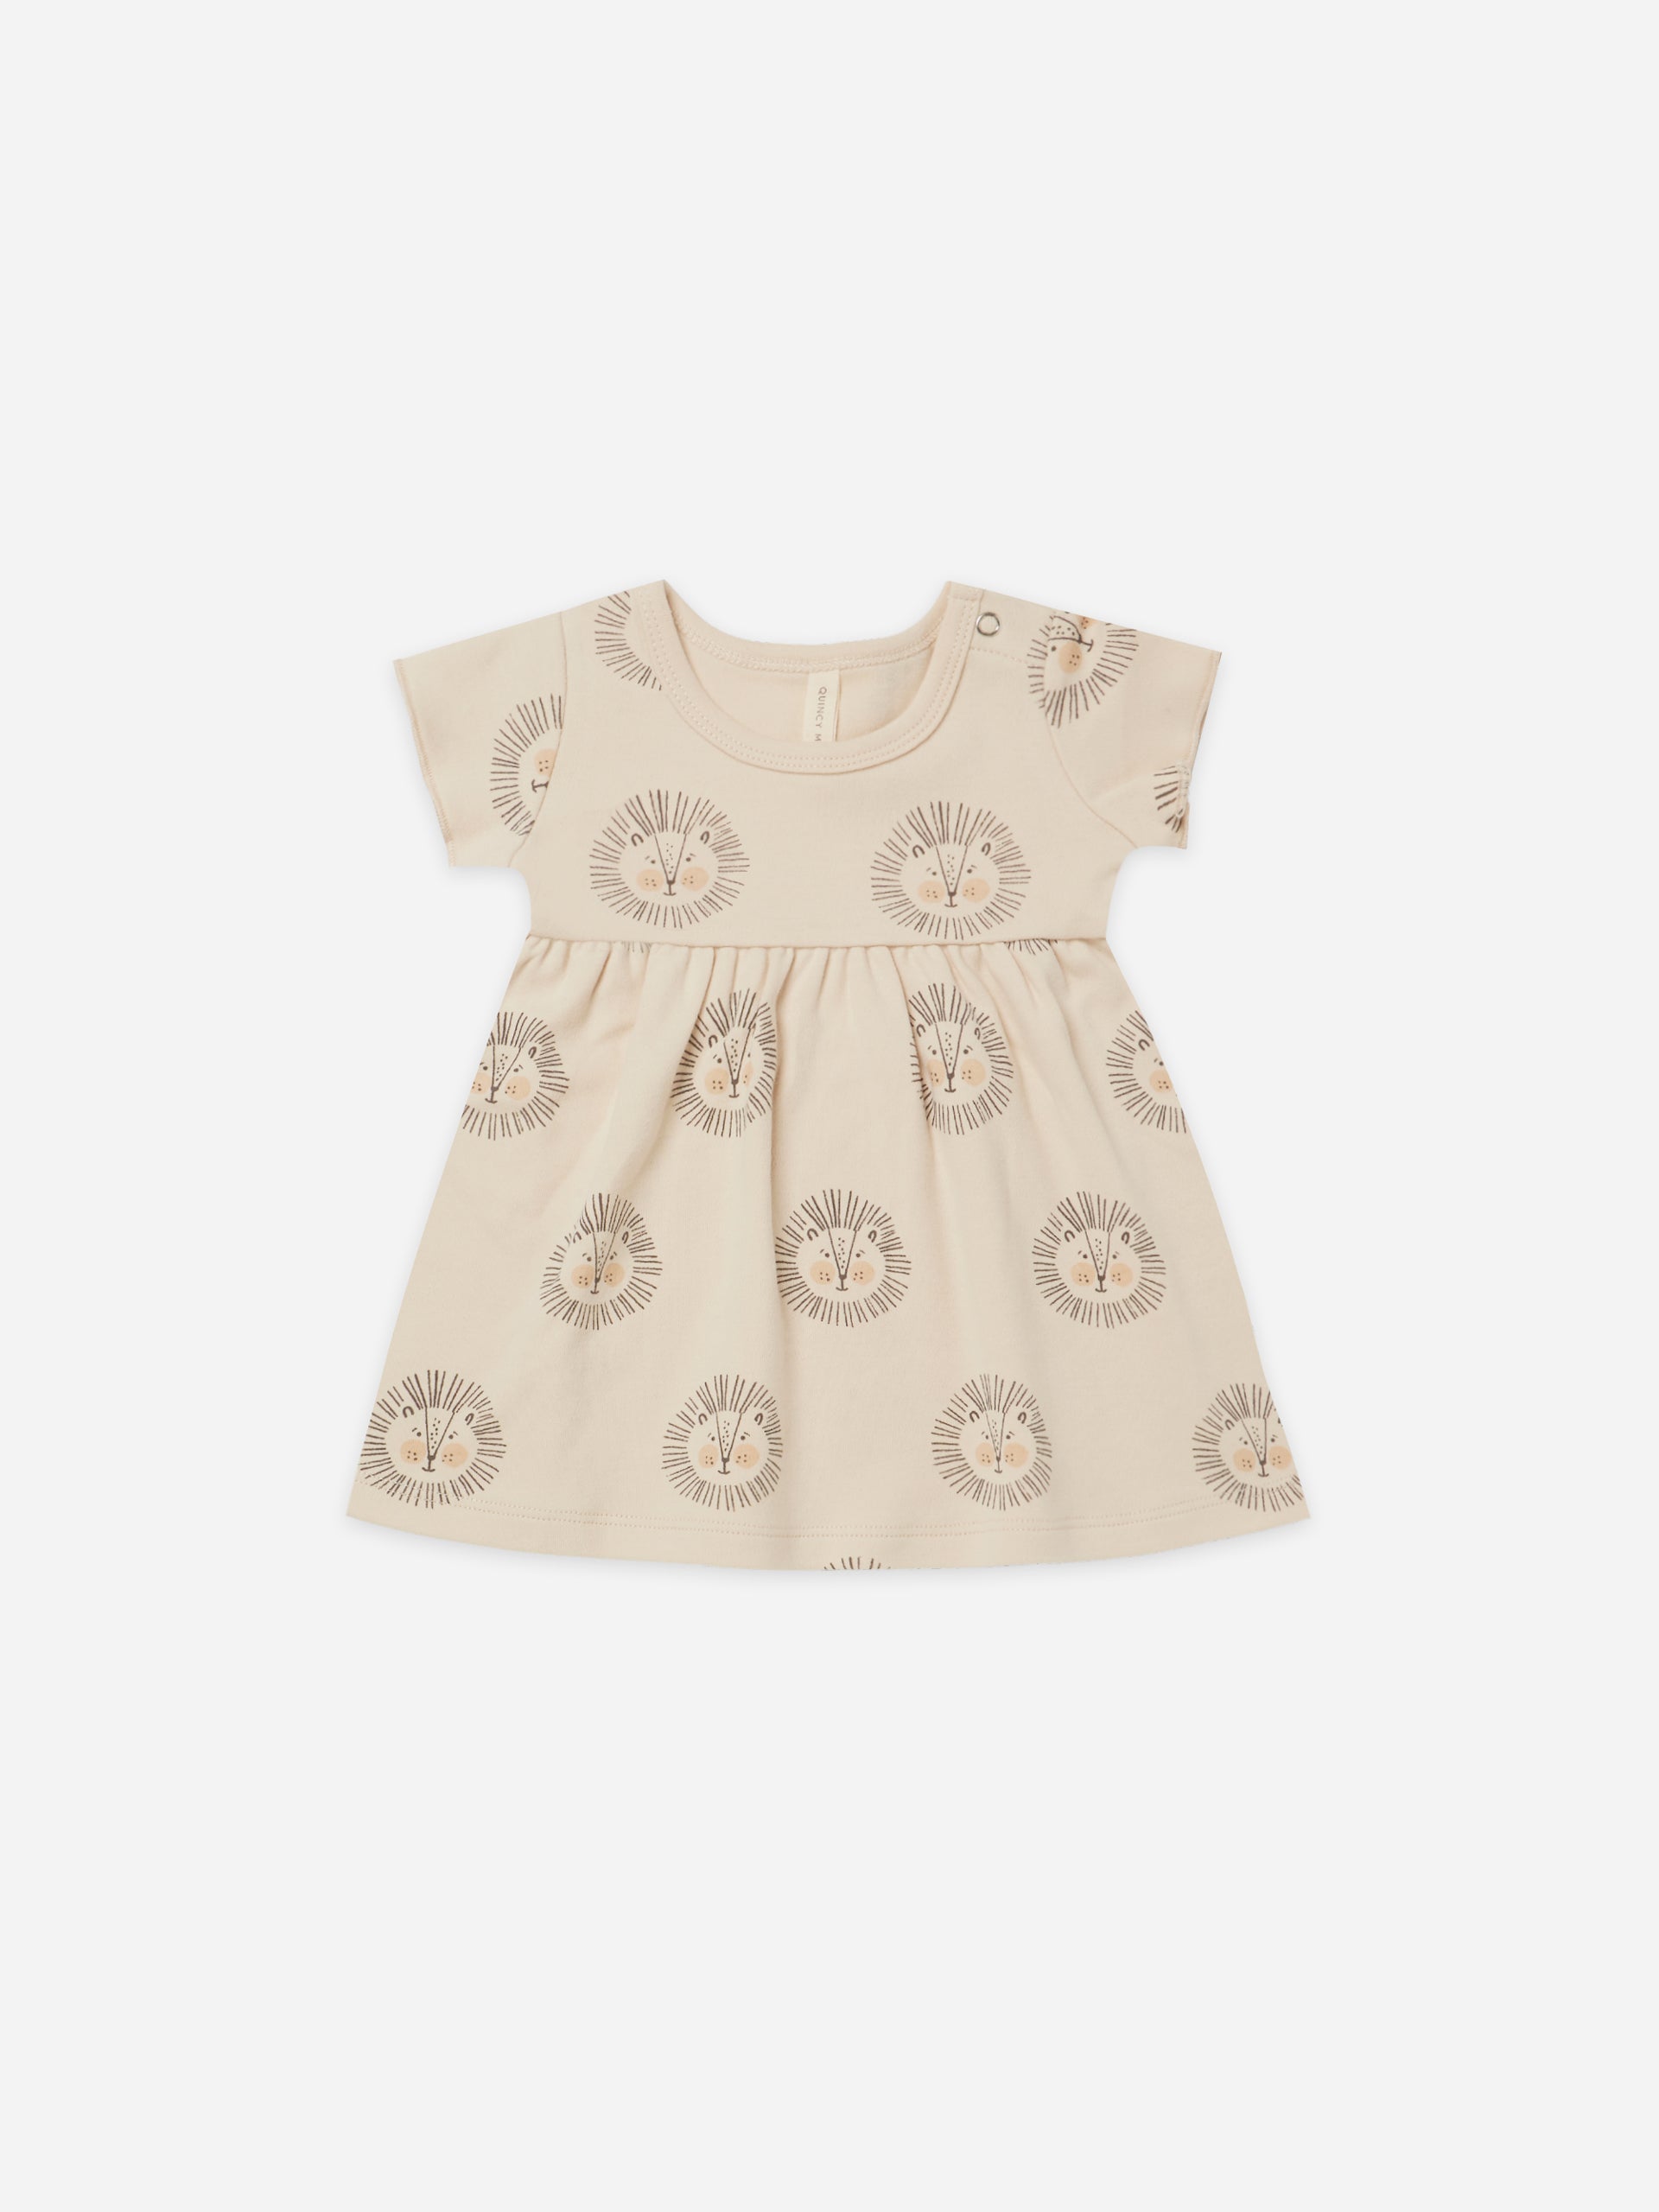 Quincy Mae Lions Short Sleeve Baby Dress